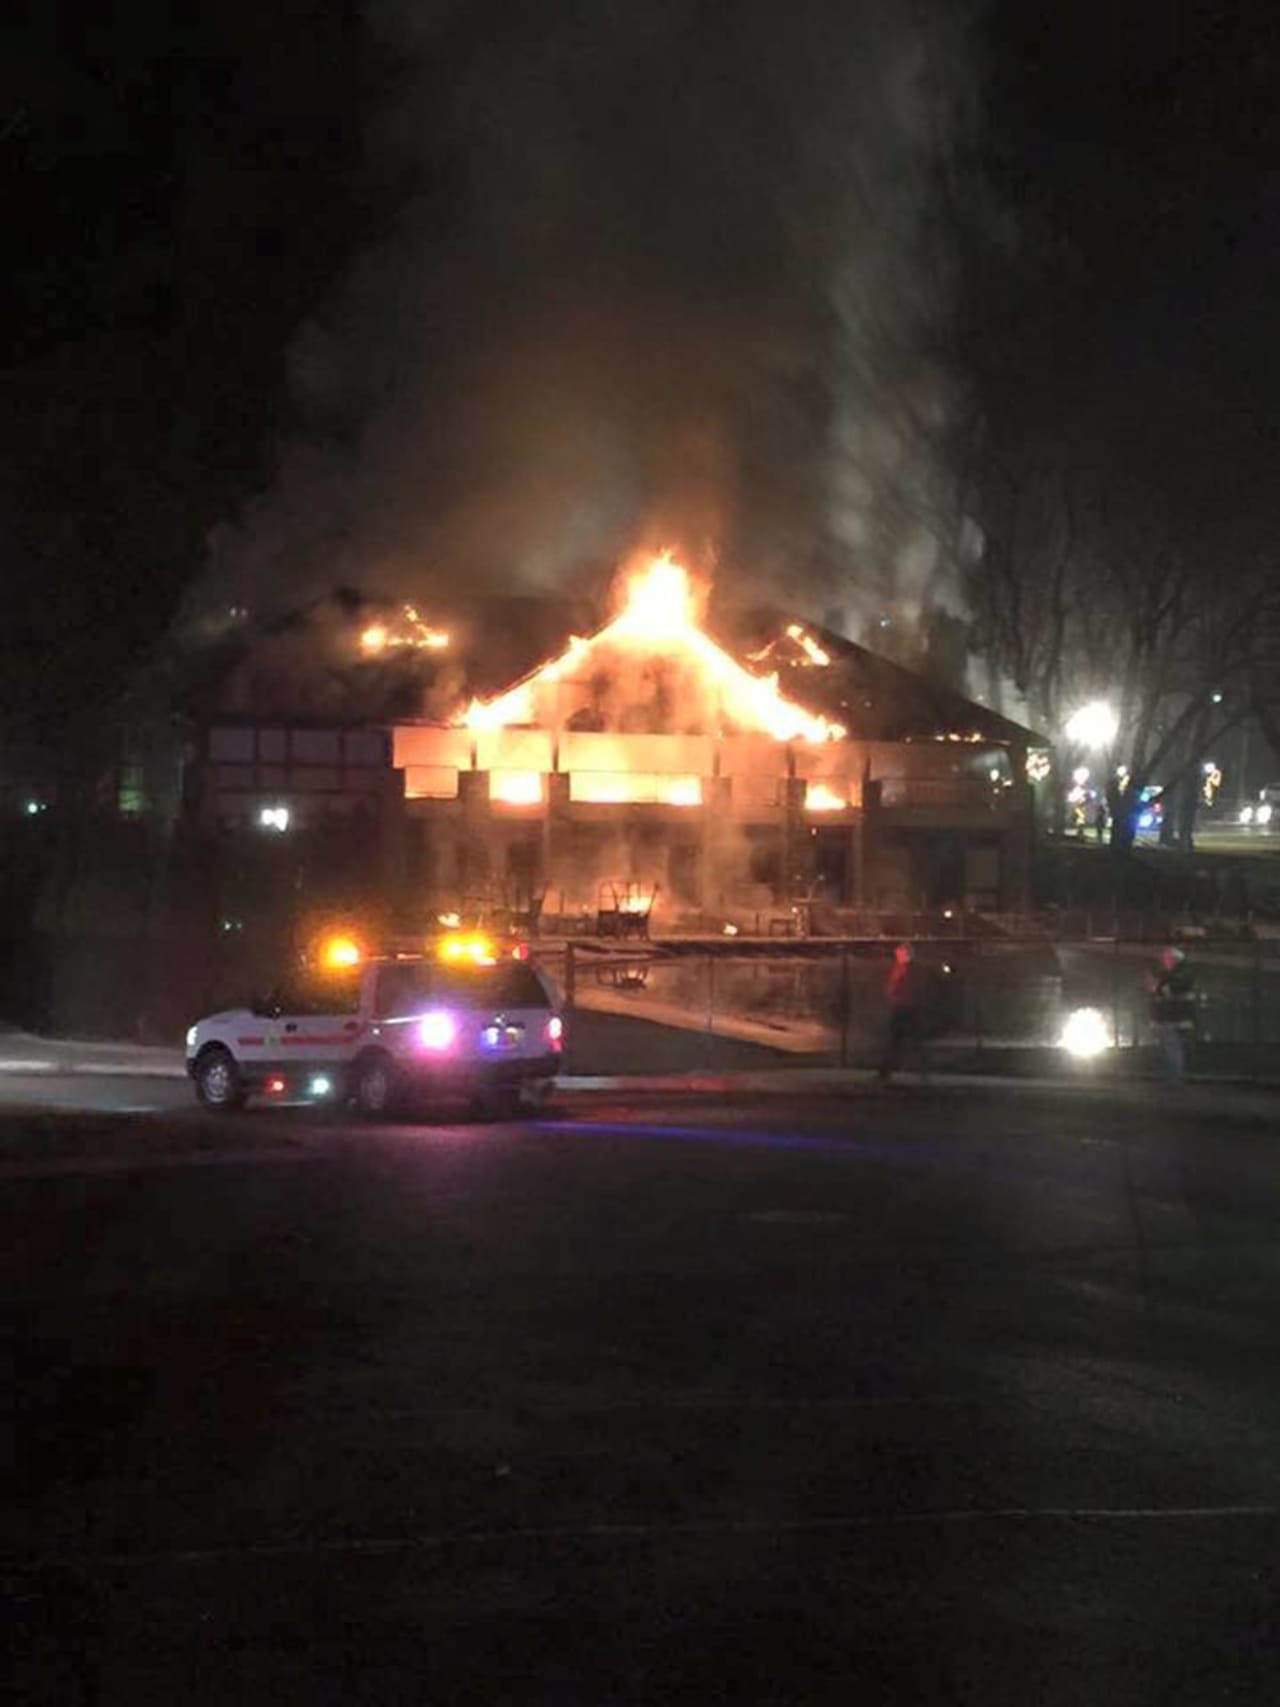 An investigation continues into a fire at the Briarcliff Pool Pavilion. 